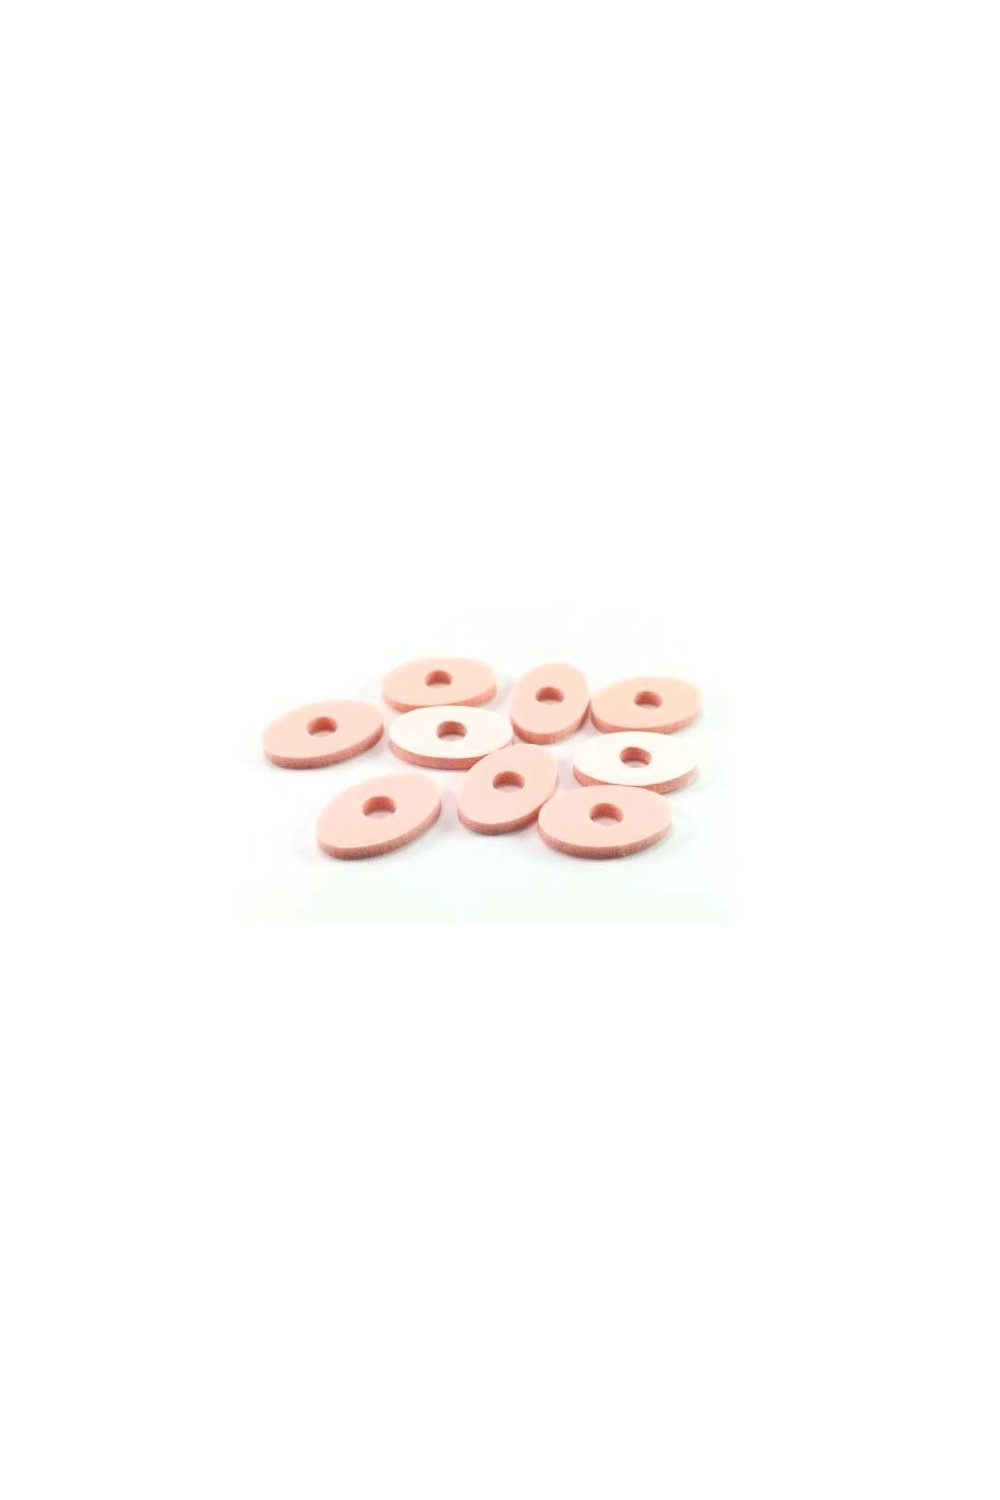 Schurz 9 Small Oval Rings Calluses